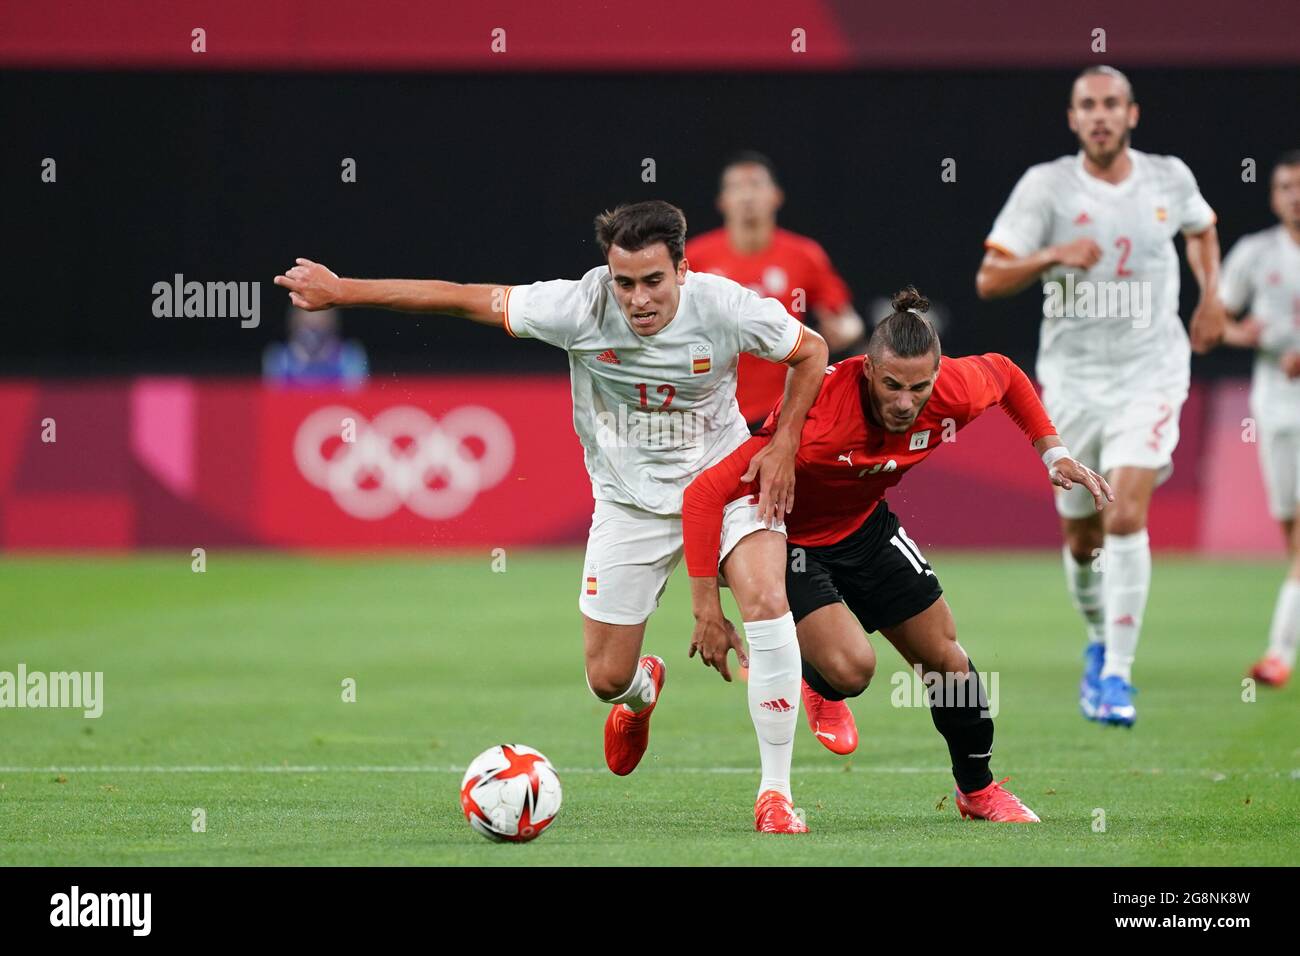 Sapporo, Japan. 22nd July, 2021. Ramadan Sobhi (10 Egypt) and Eric Garcia (12 Spain) battle for the ball (duel) during the Men's Olympic Football Tournament Tokyo 2020 match between Egypt and Spain at Sapporo Dome in Sapporo, Japan. Credit: SPP Sport Press Photo. /Alamy Live News Stock Photo